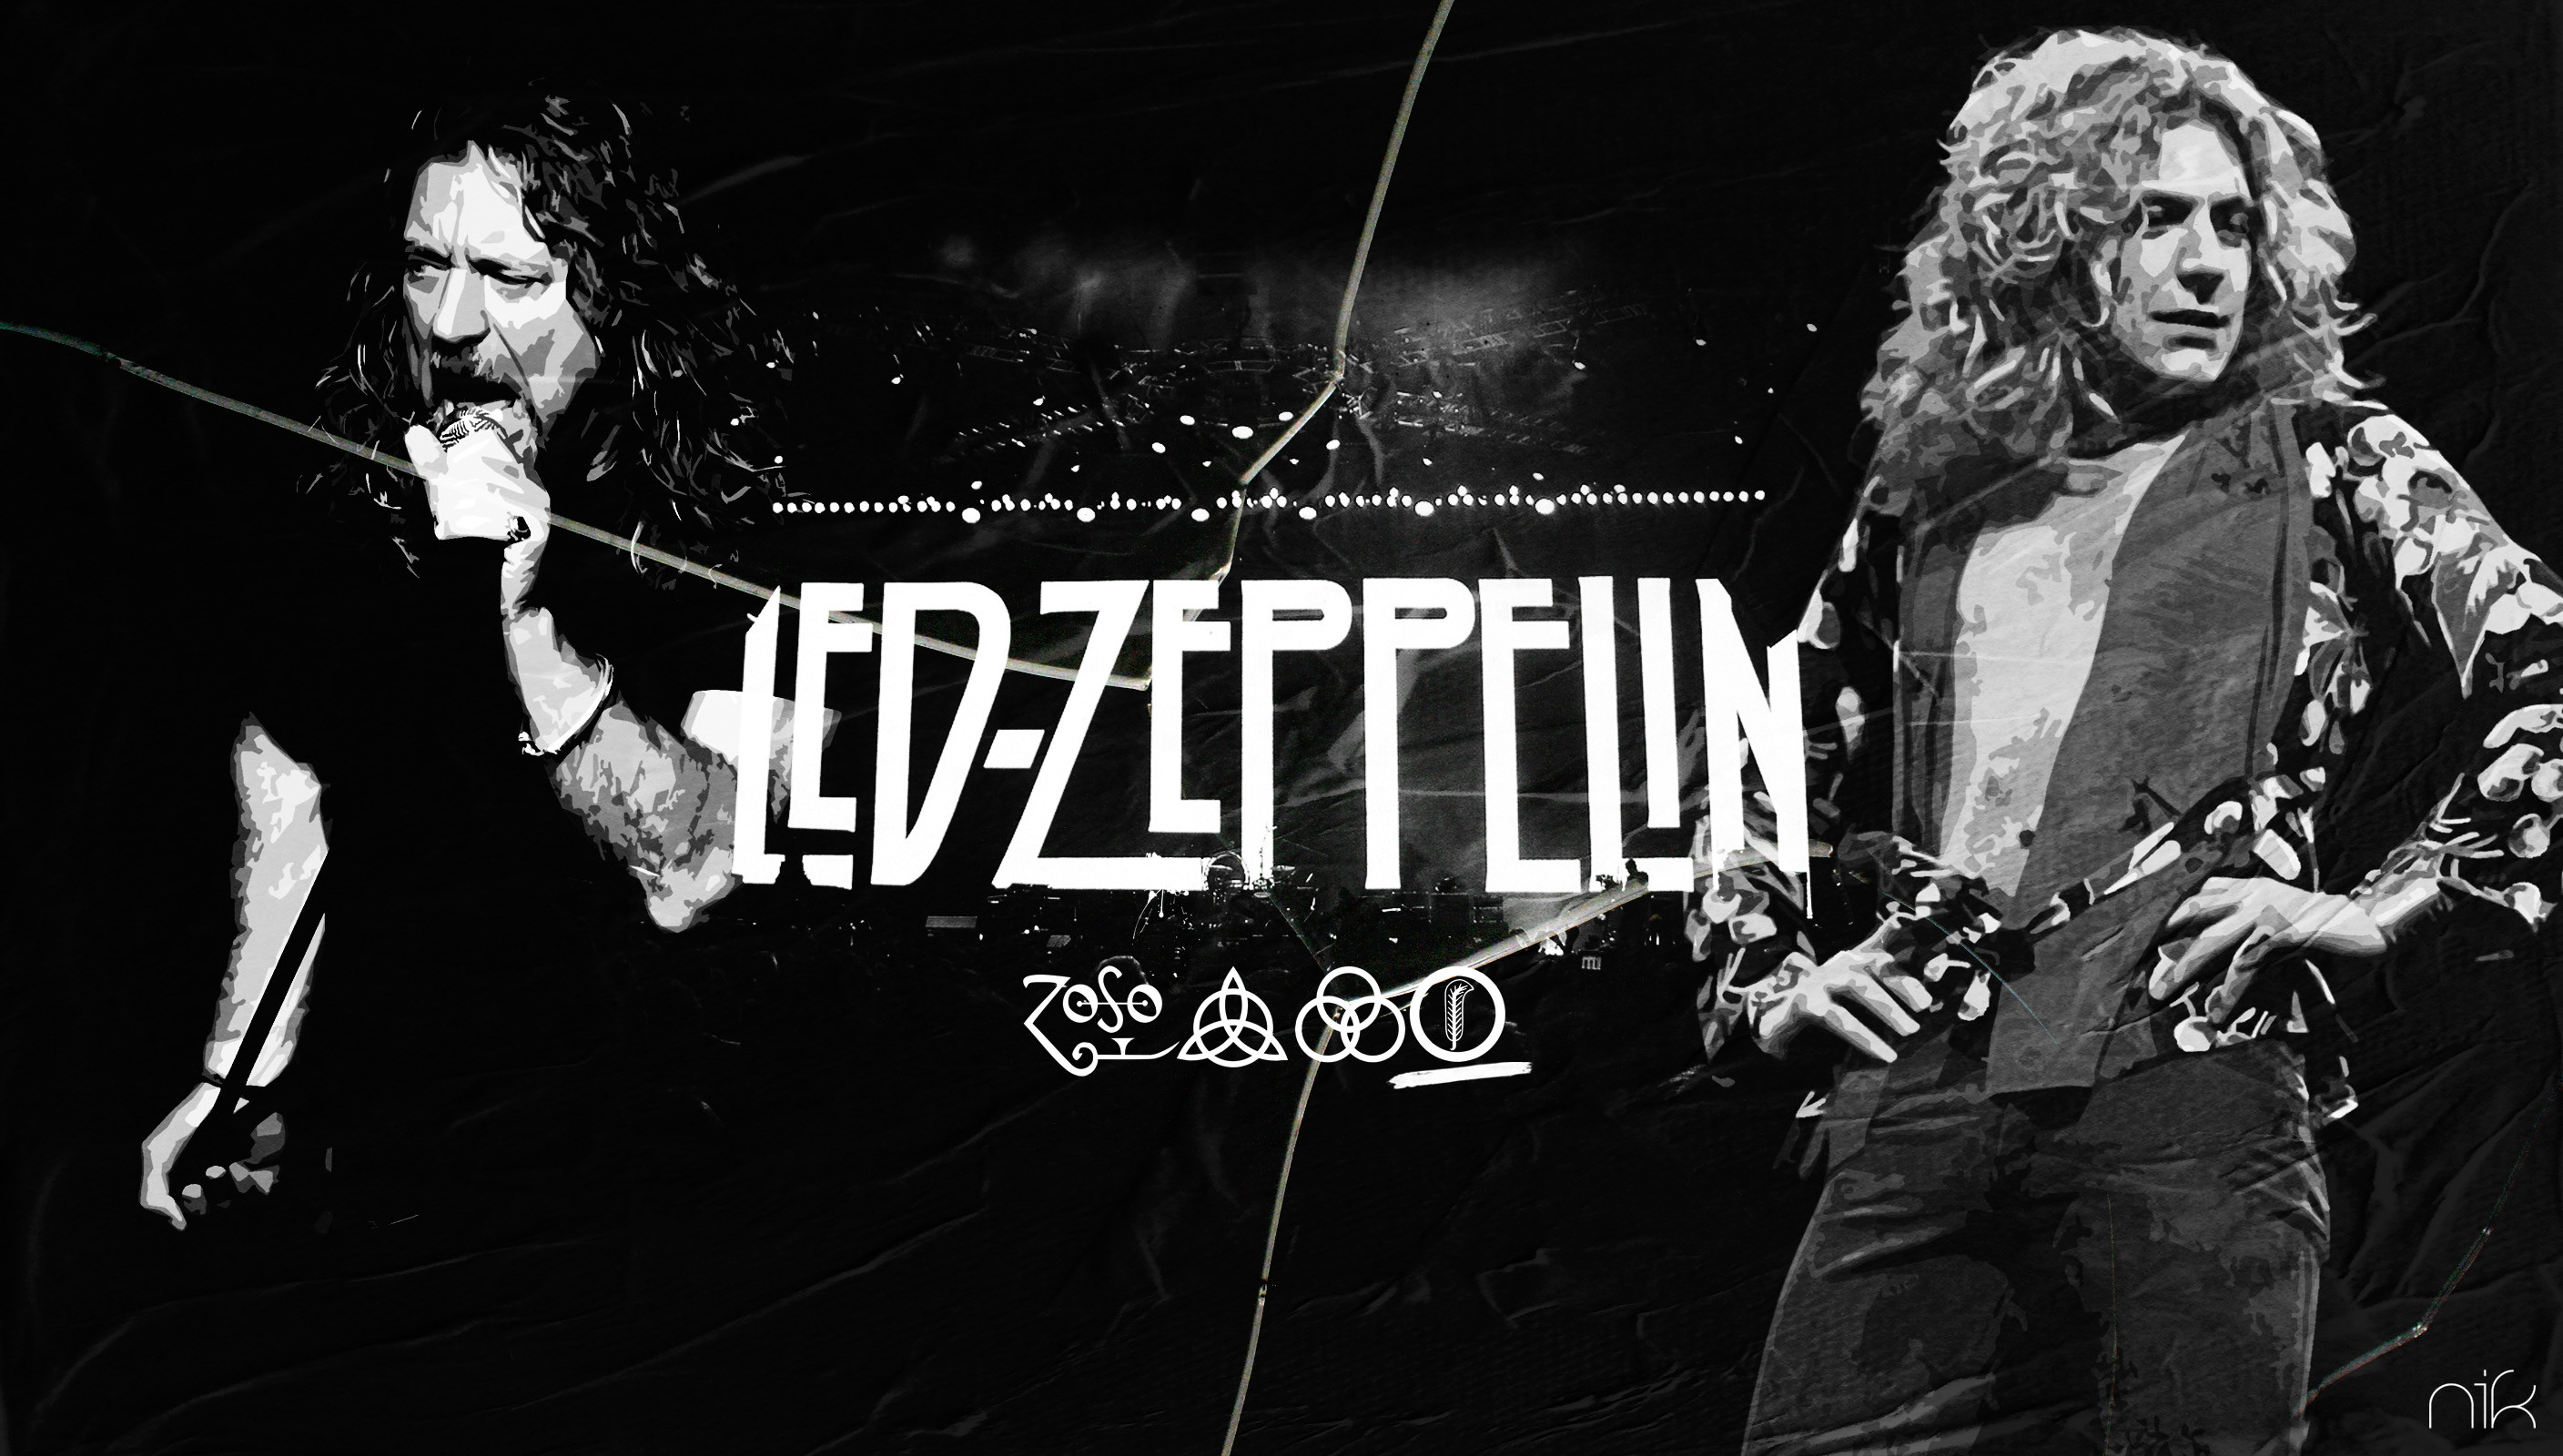 2816x1600 Led Zeppelin high definition wallpapers